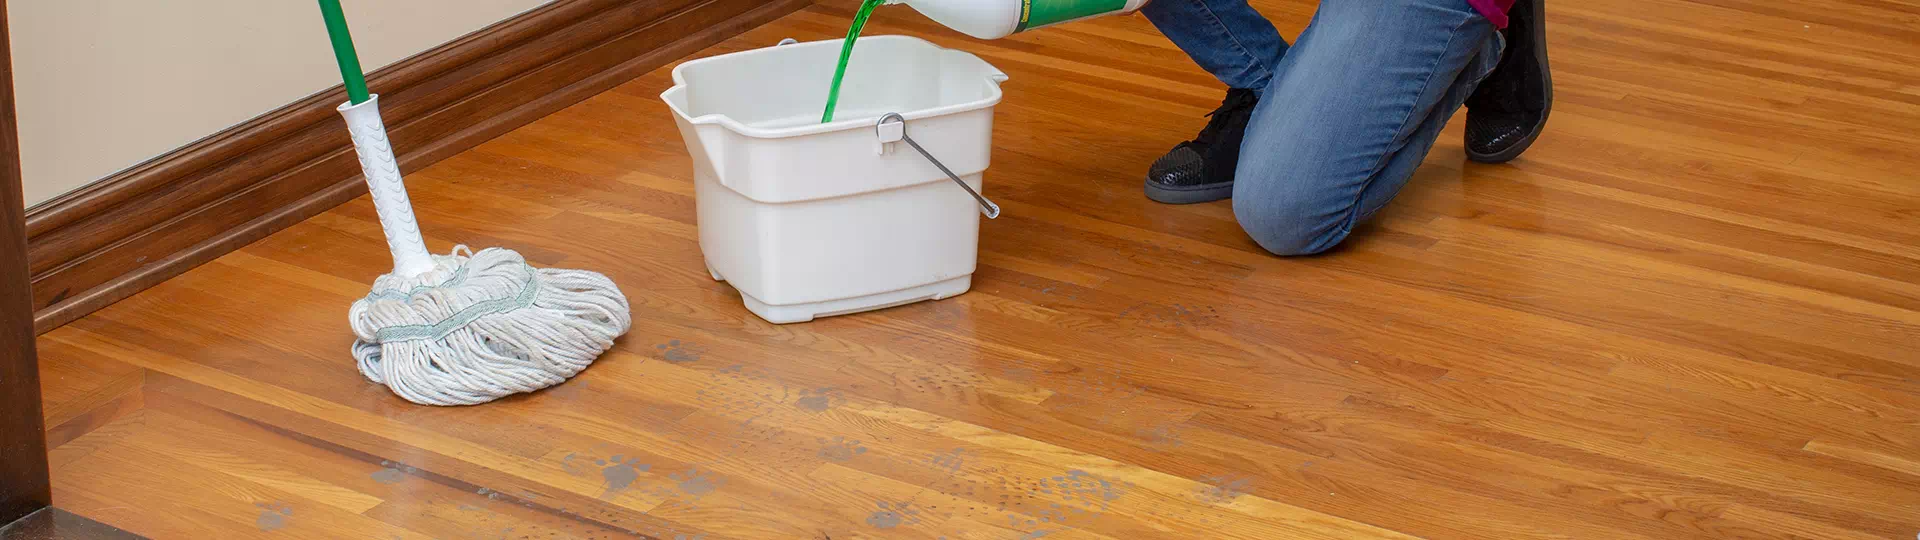 How To Clean Hardwood Floors Simple Green, How To Clean Dull Hardwood Floors